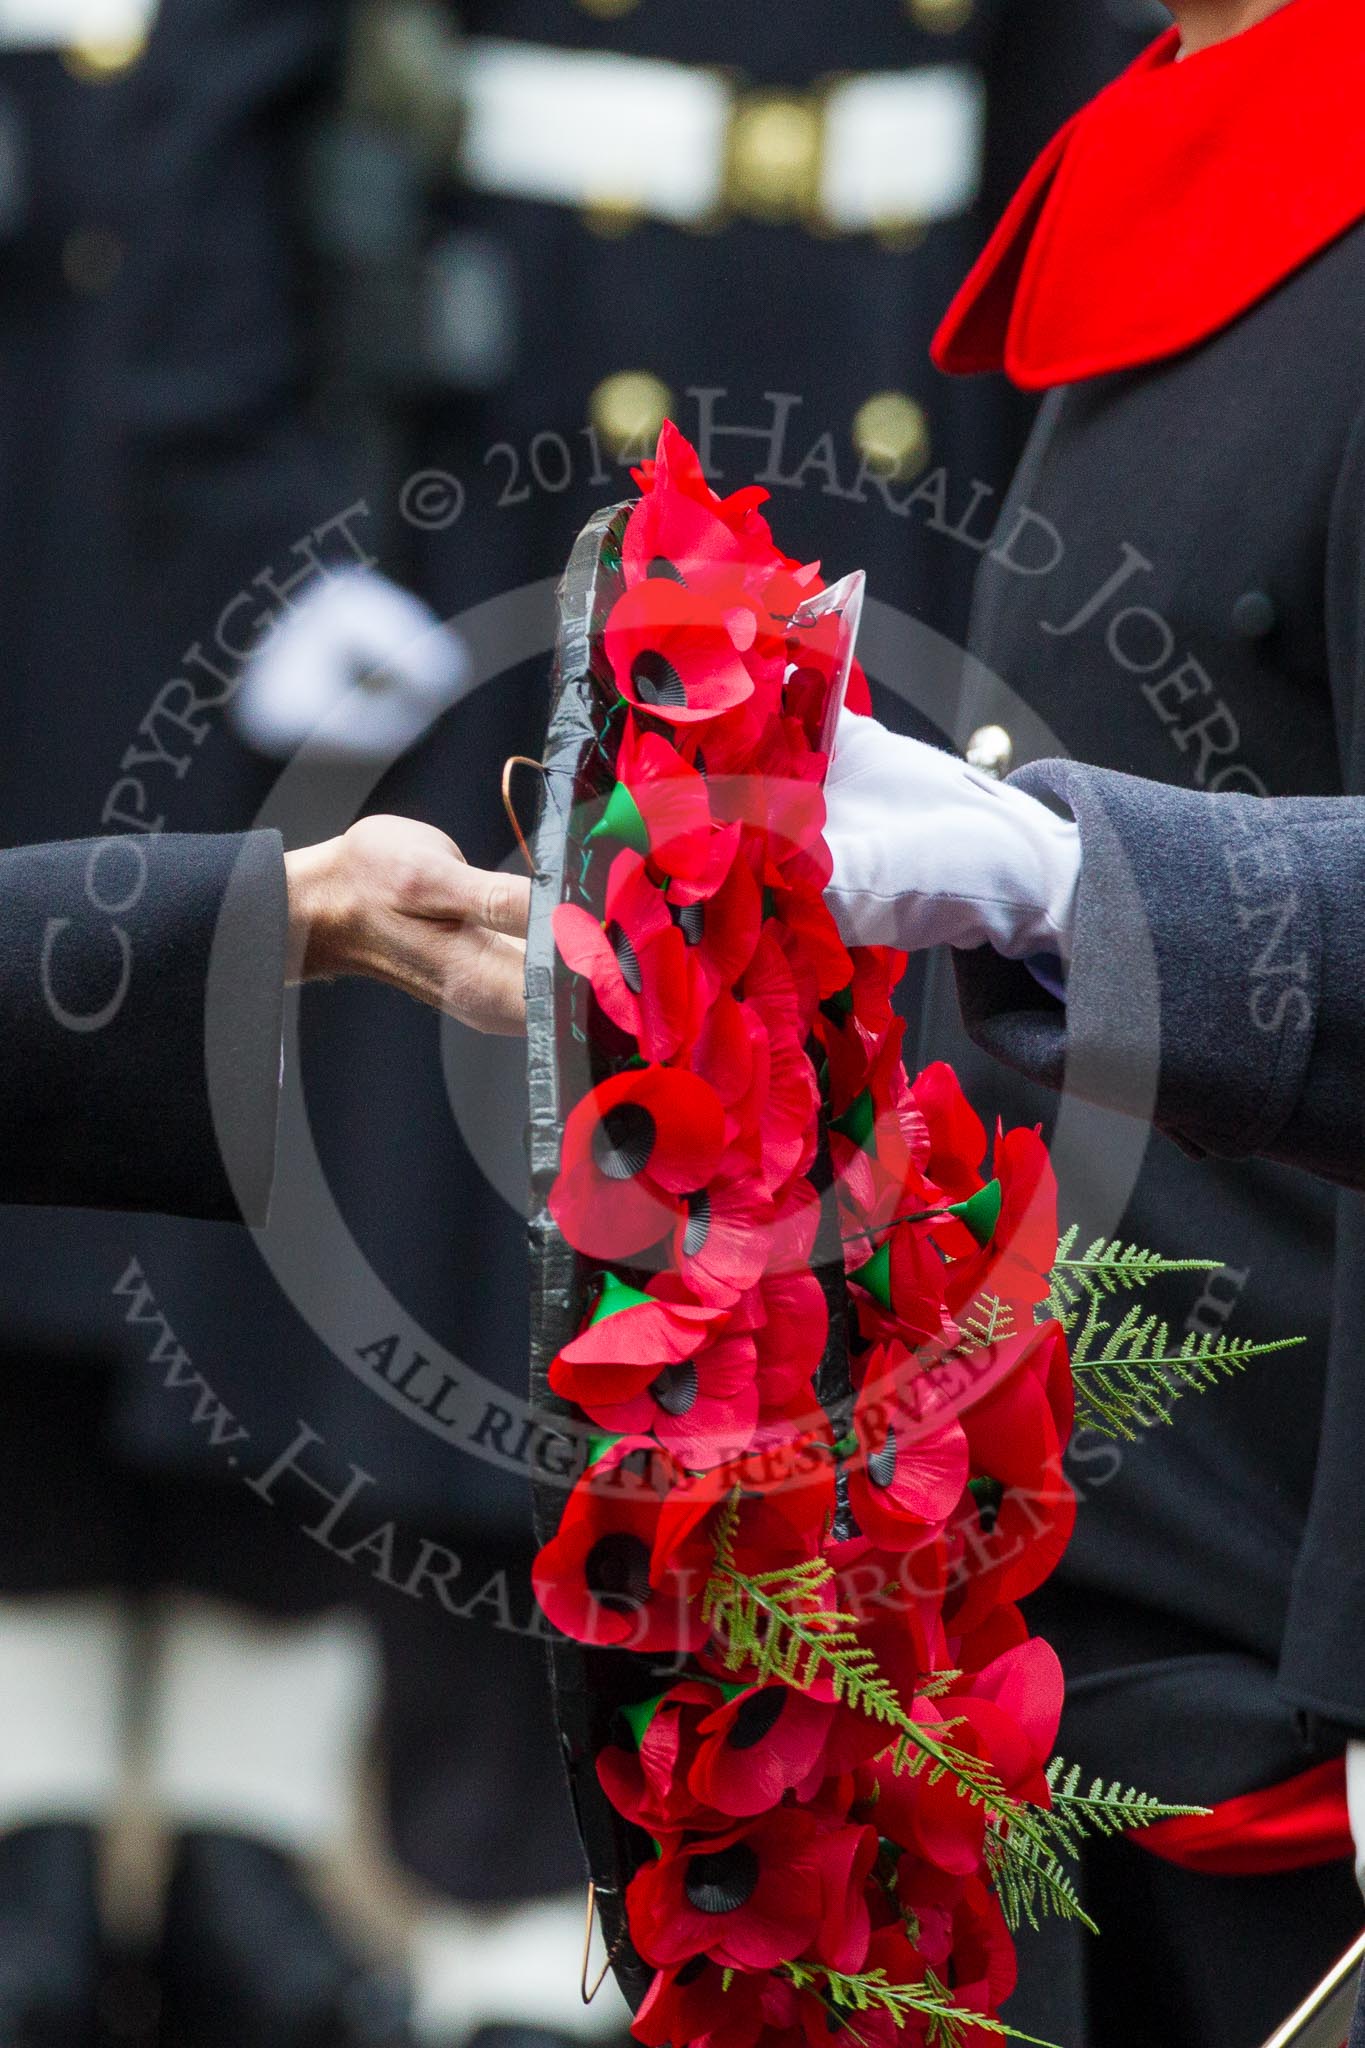 Remembrance Sunday at the Cenotaph in London 2014: The handing over of a wreath - Lieutenant James Benbow, Royal Navy, and HRH The Duke of Cambridge.
Press stand opposite the Foreign Office building, Whitehall, London SW1,
London,
Greater London,
United Kingdom,
on 09 November 2014 at 11:05, image #202